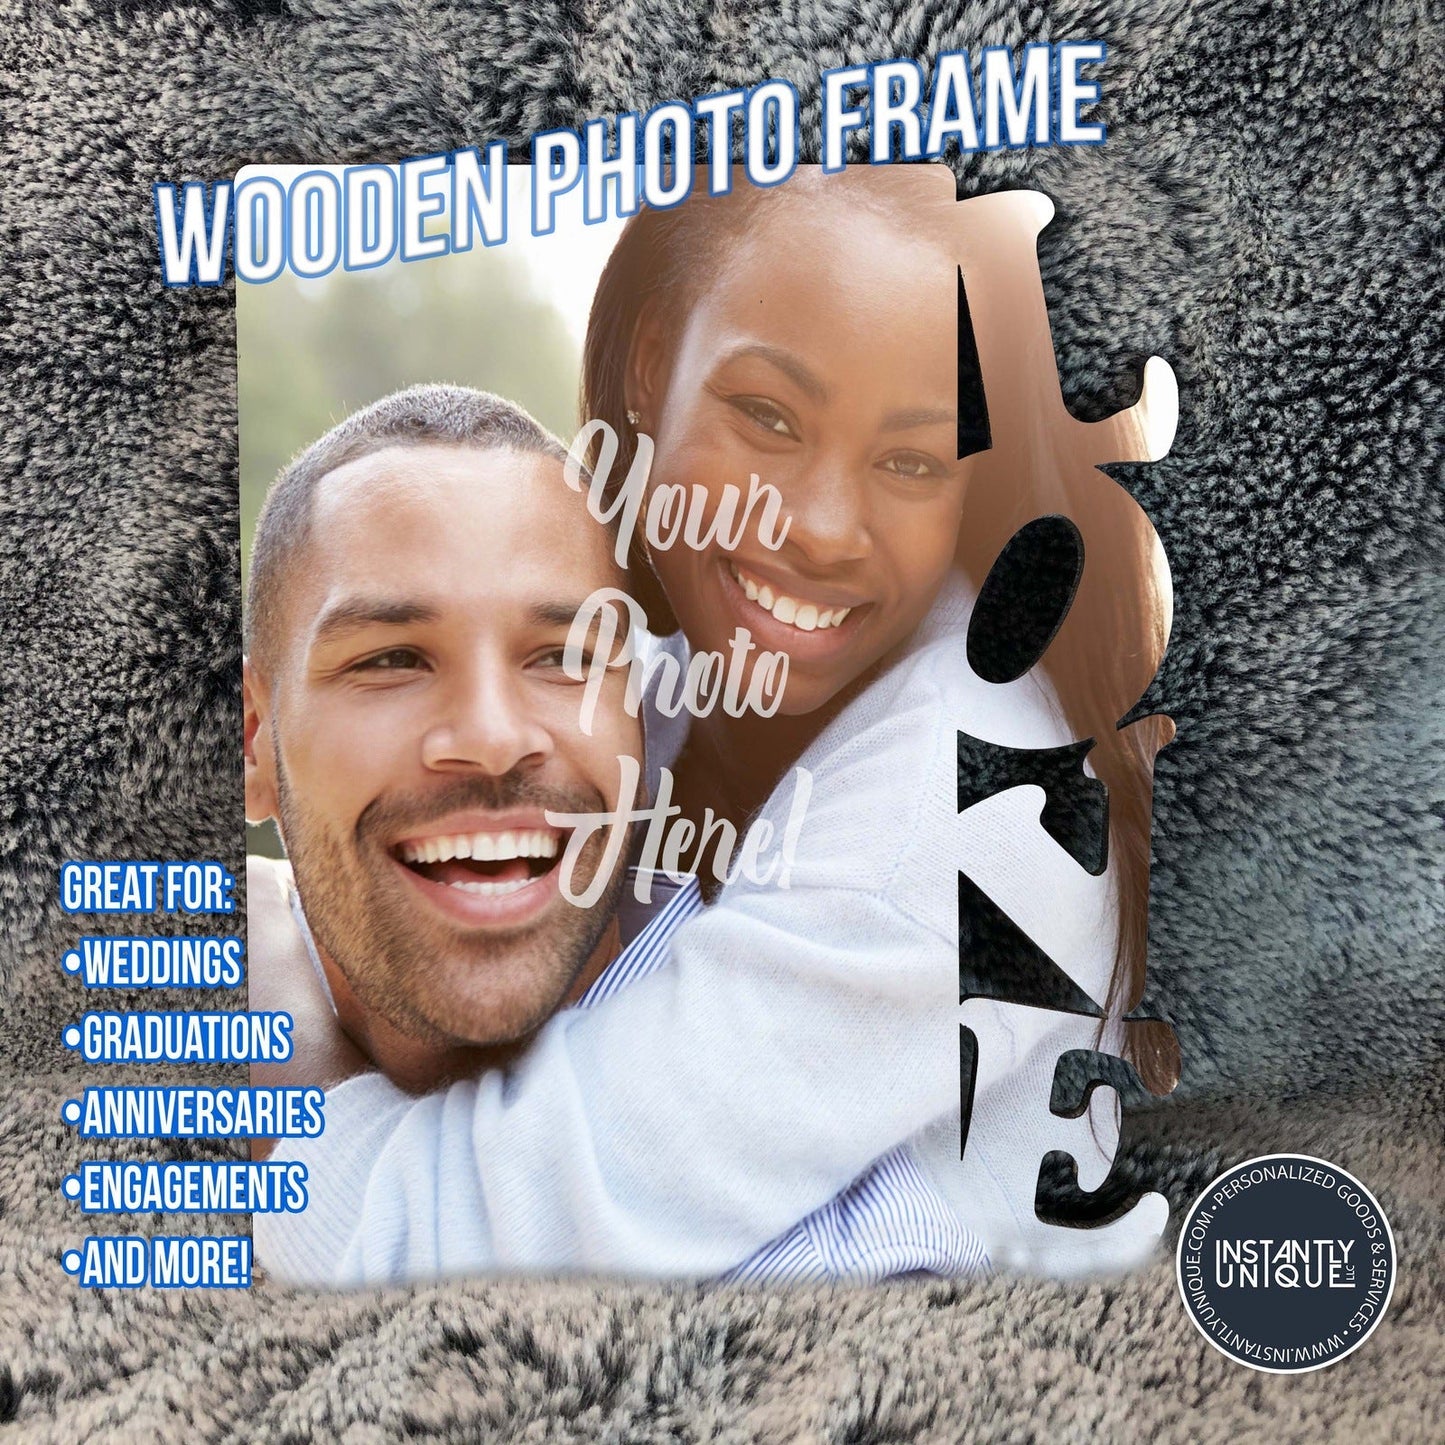 Custom LOVE Shape Photo Panel with Picture - Made of Hardboard - Add Your Photo